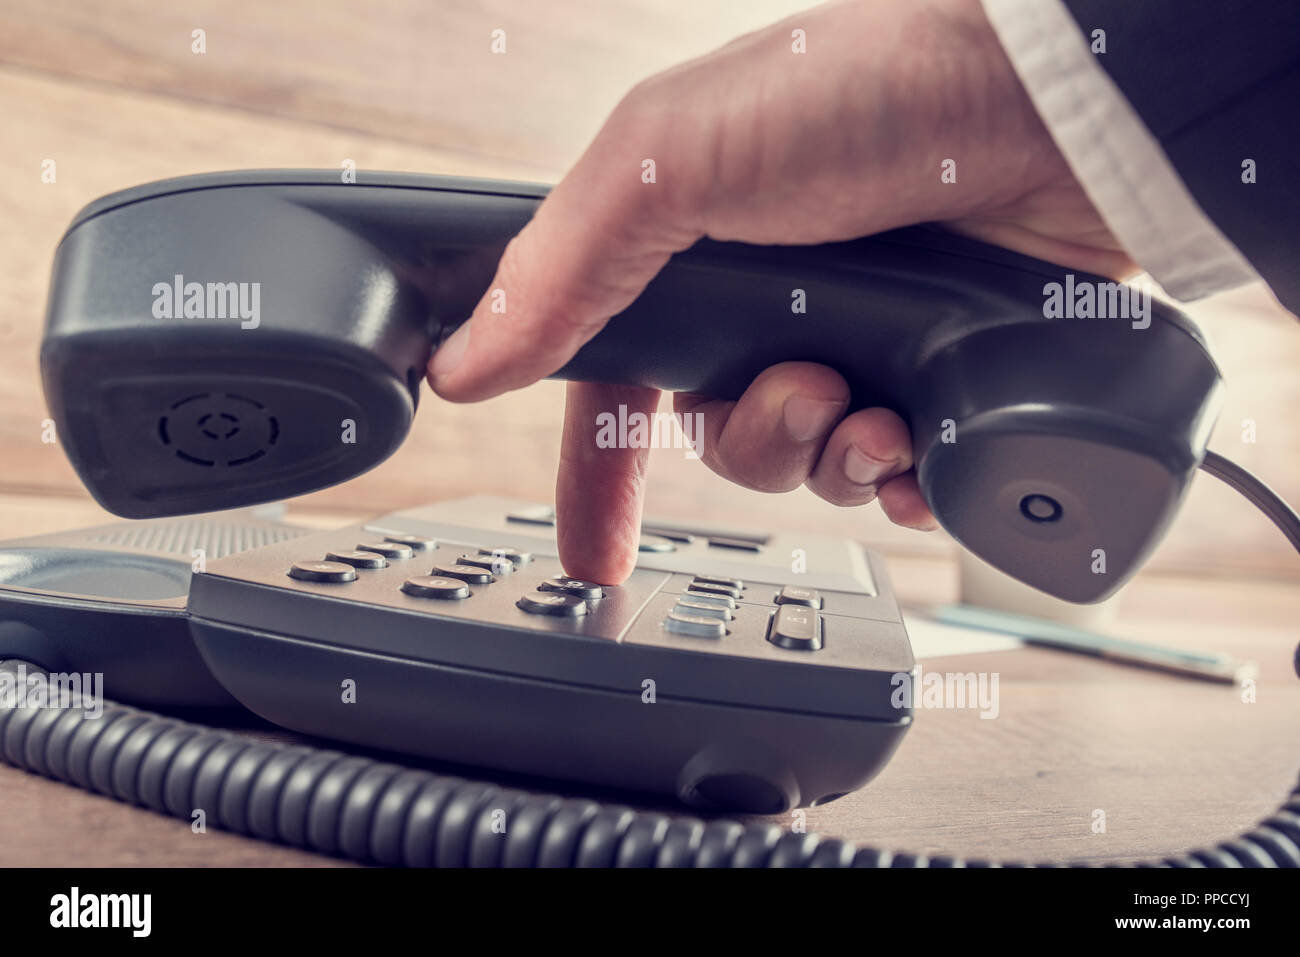 Closeup of businessman making a telephone call by dialing a phone number on a classical black landline device with a retro faded look. Stock Photo